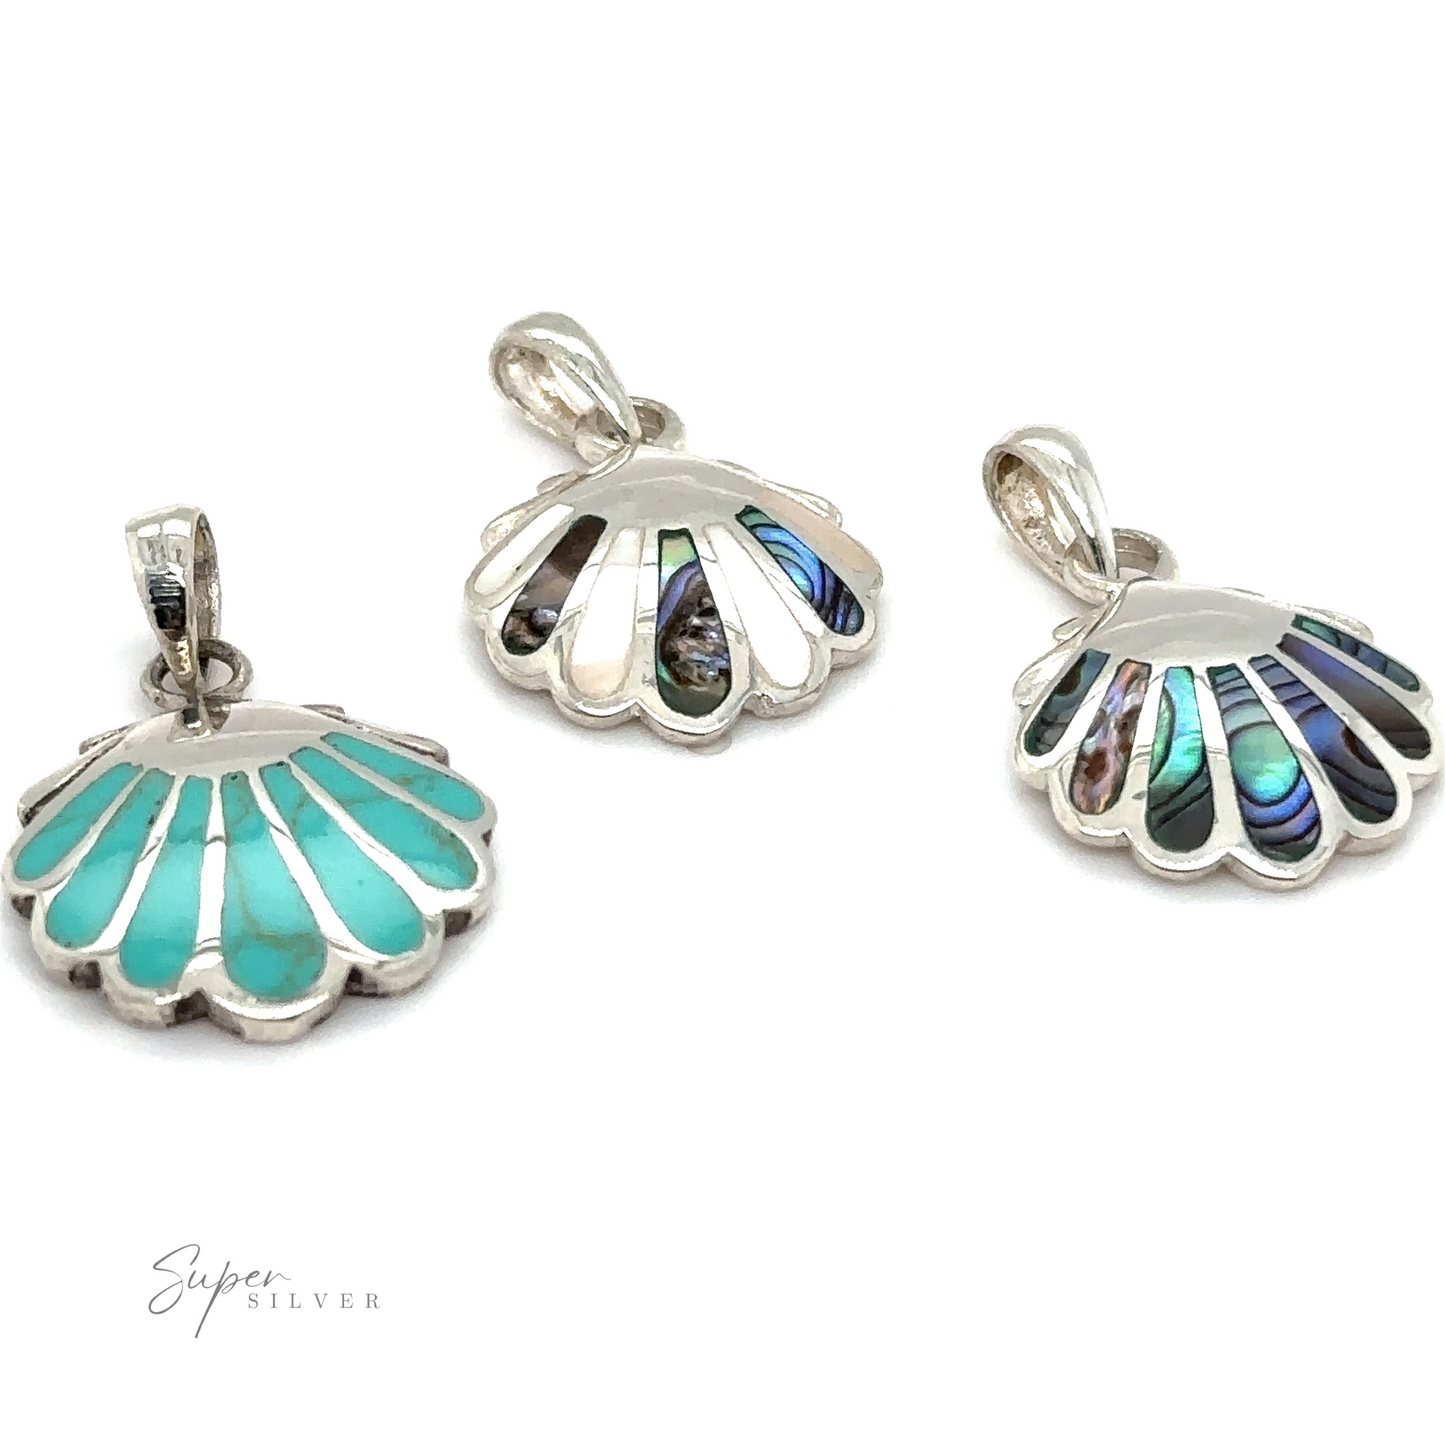 Three Clam Shell Pendants adorned with turquoise and abalone shells, showcasing oceanic beauty.